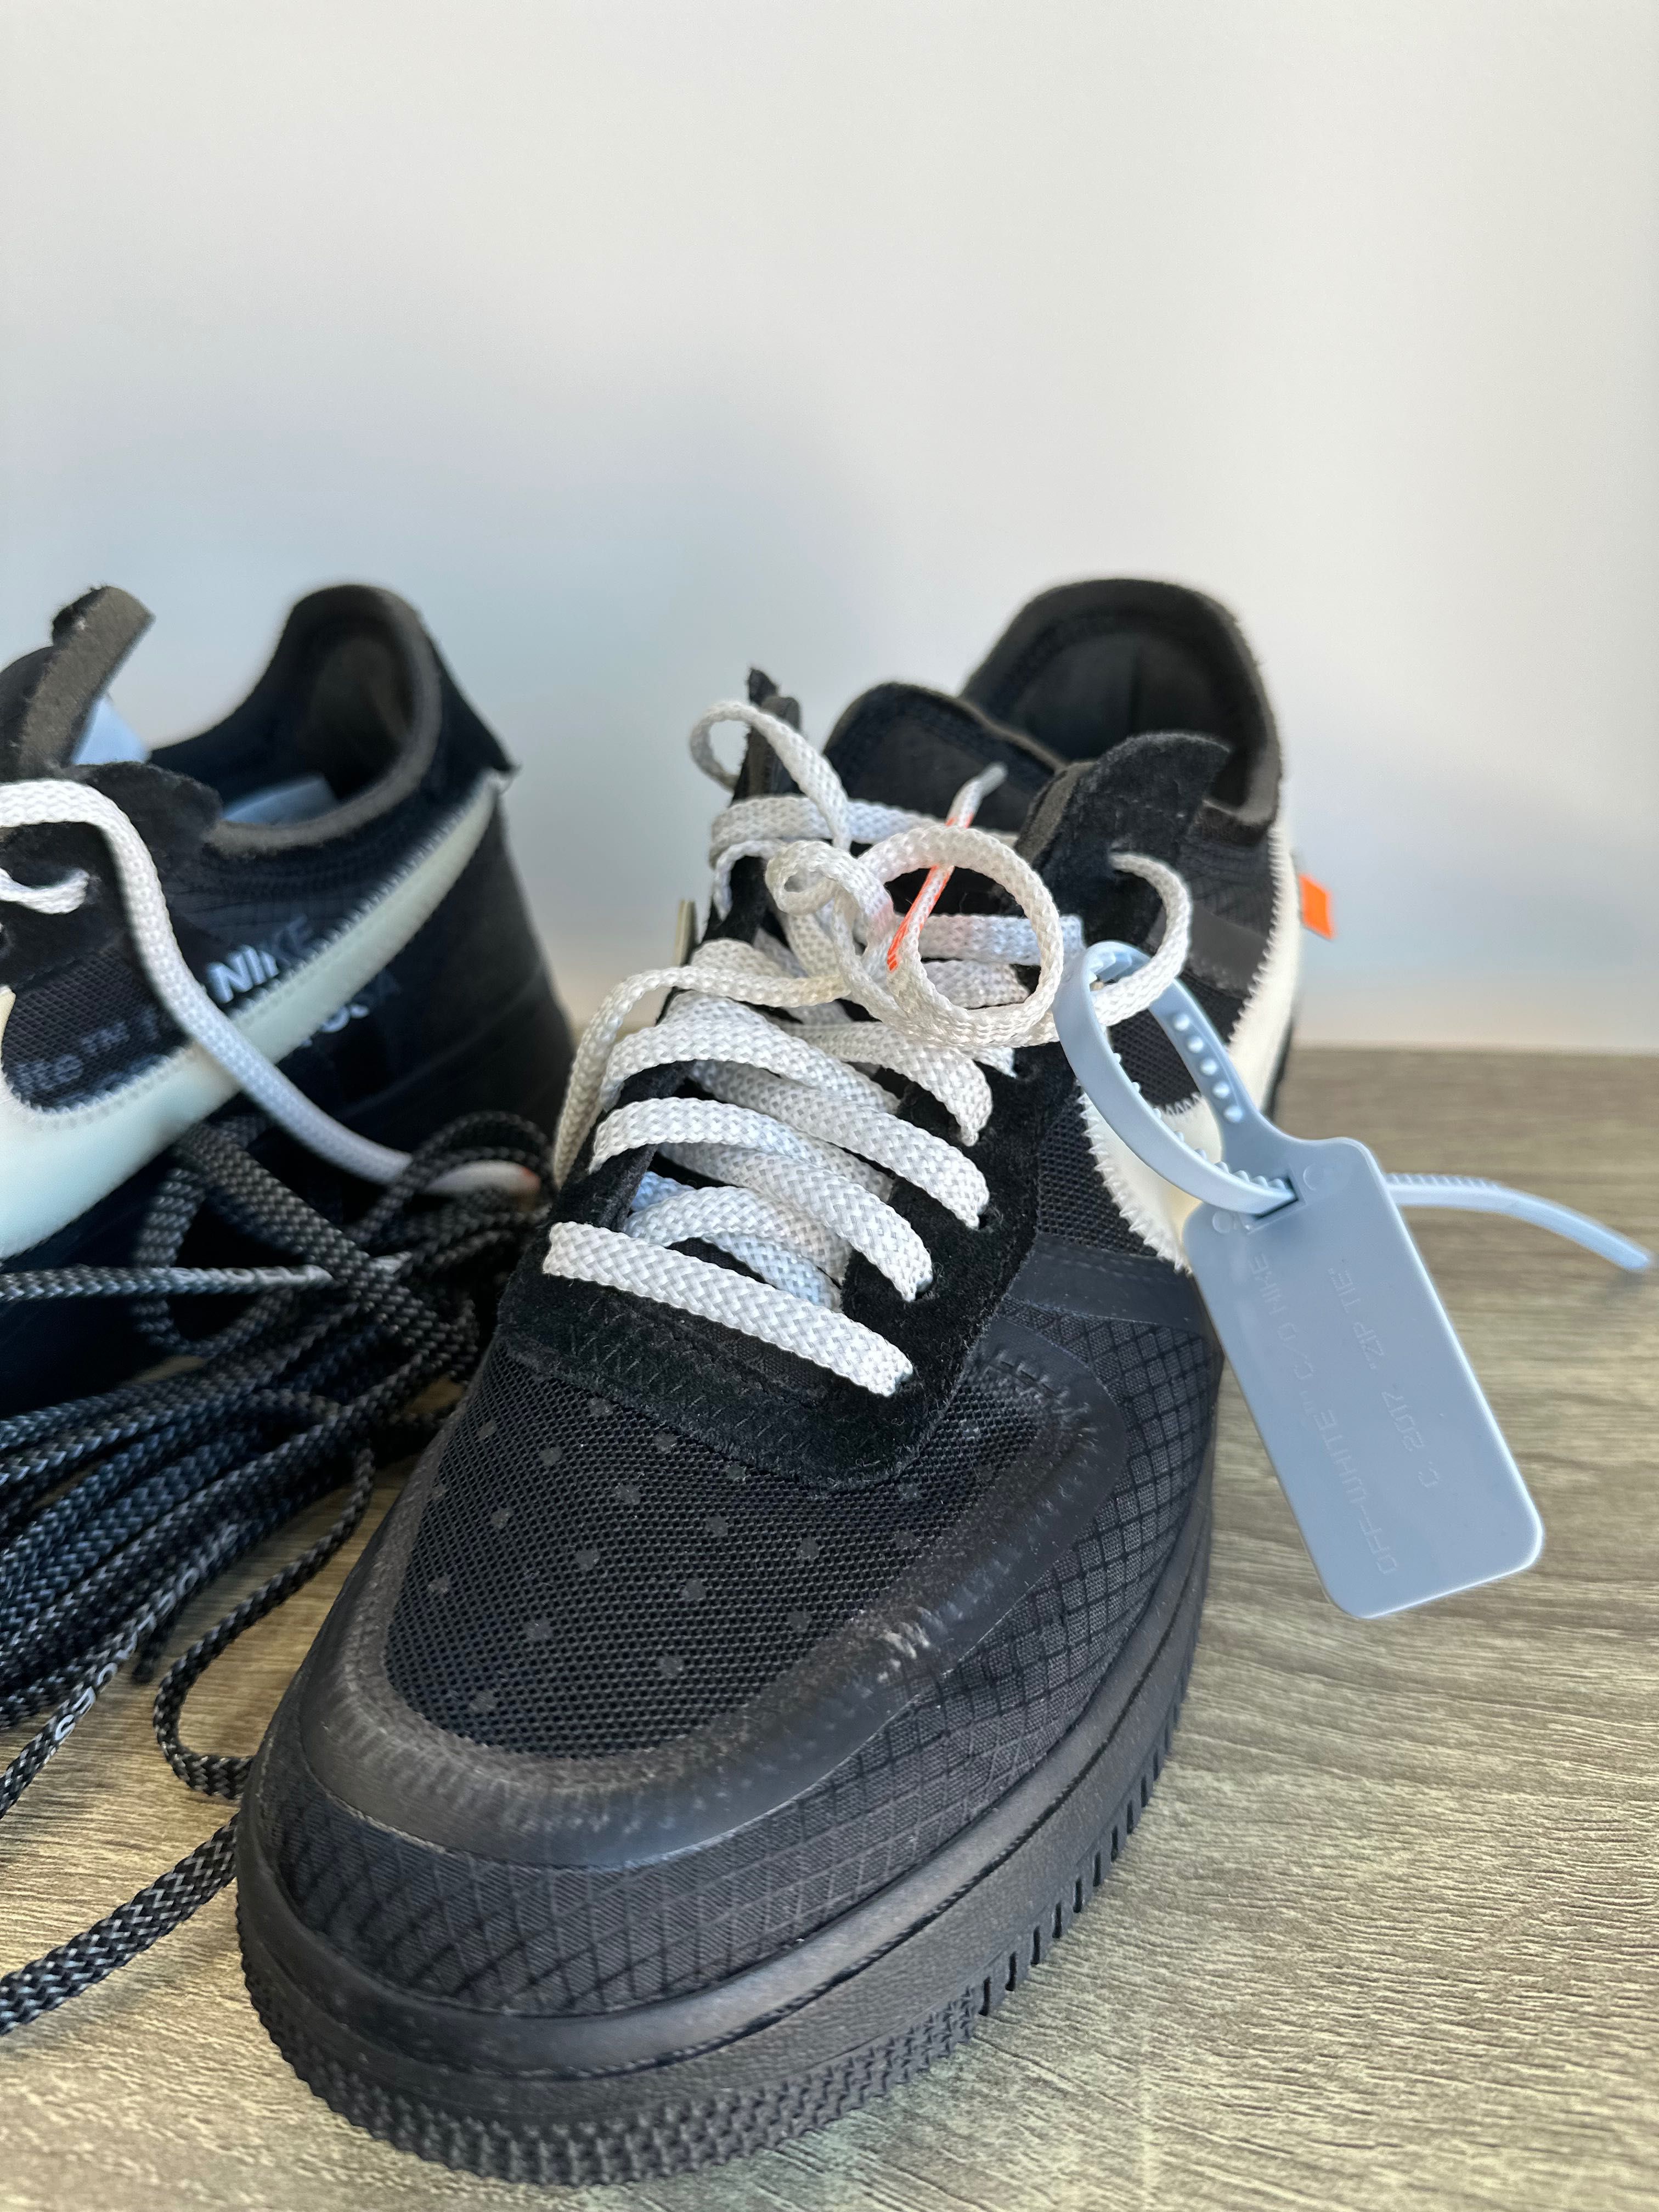 Nike air force 1 x Off-White " The ten "